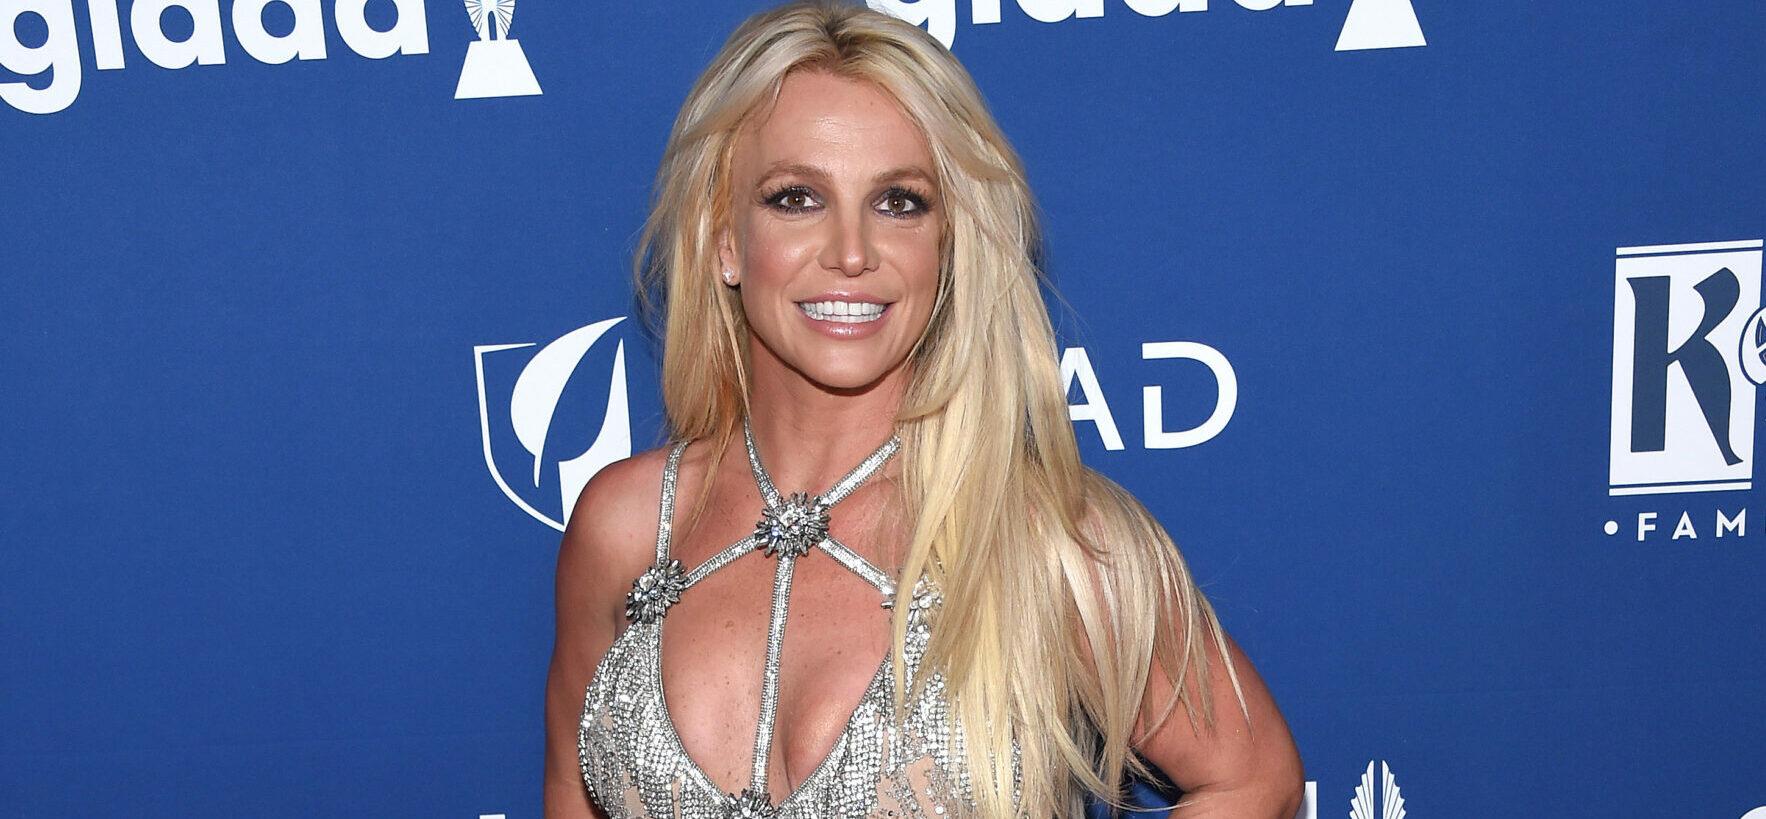 Britney Spears Wows In Barely There Dress With Plunging Neckline